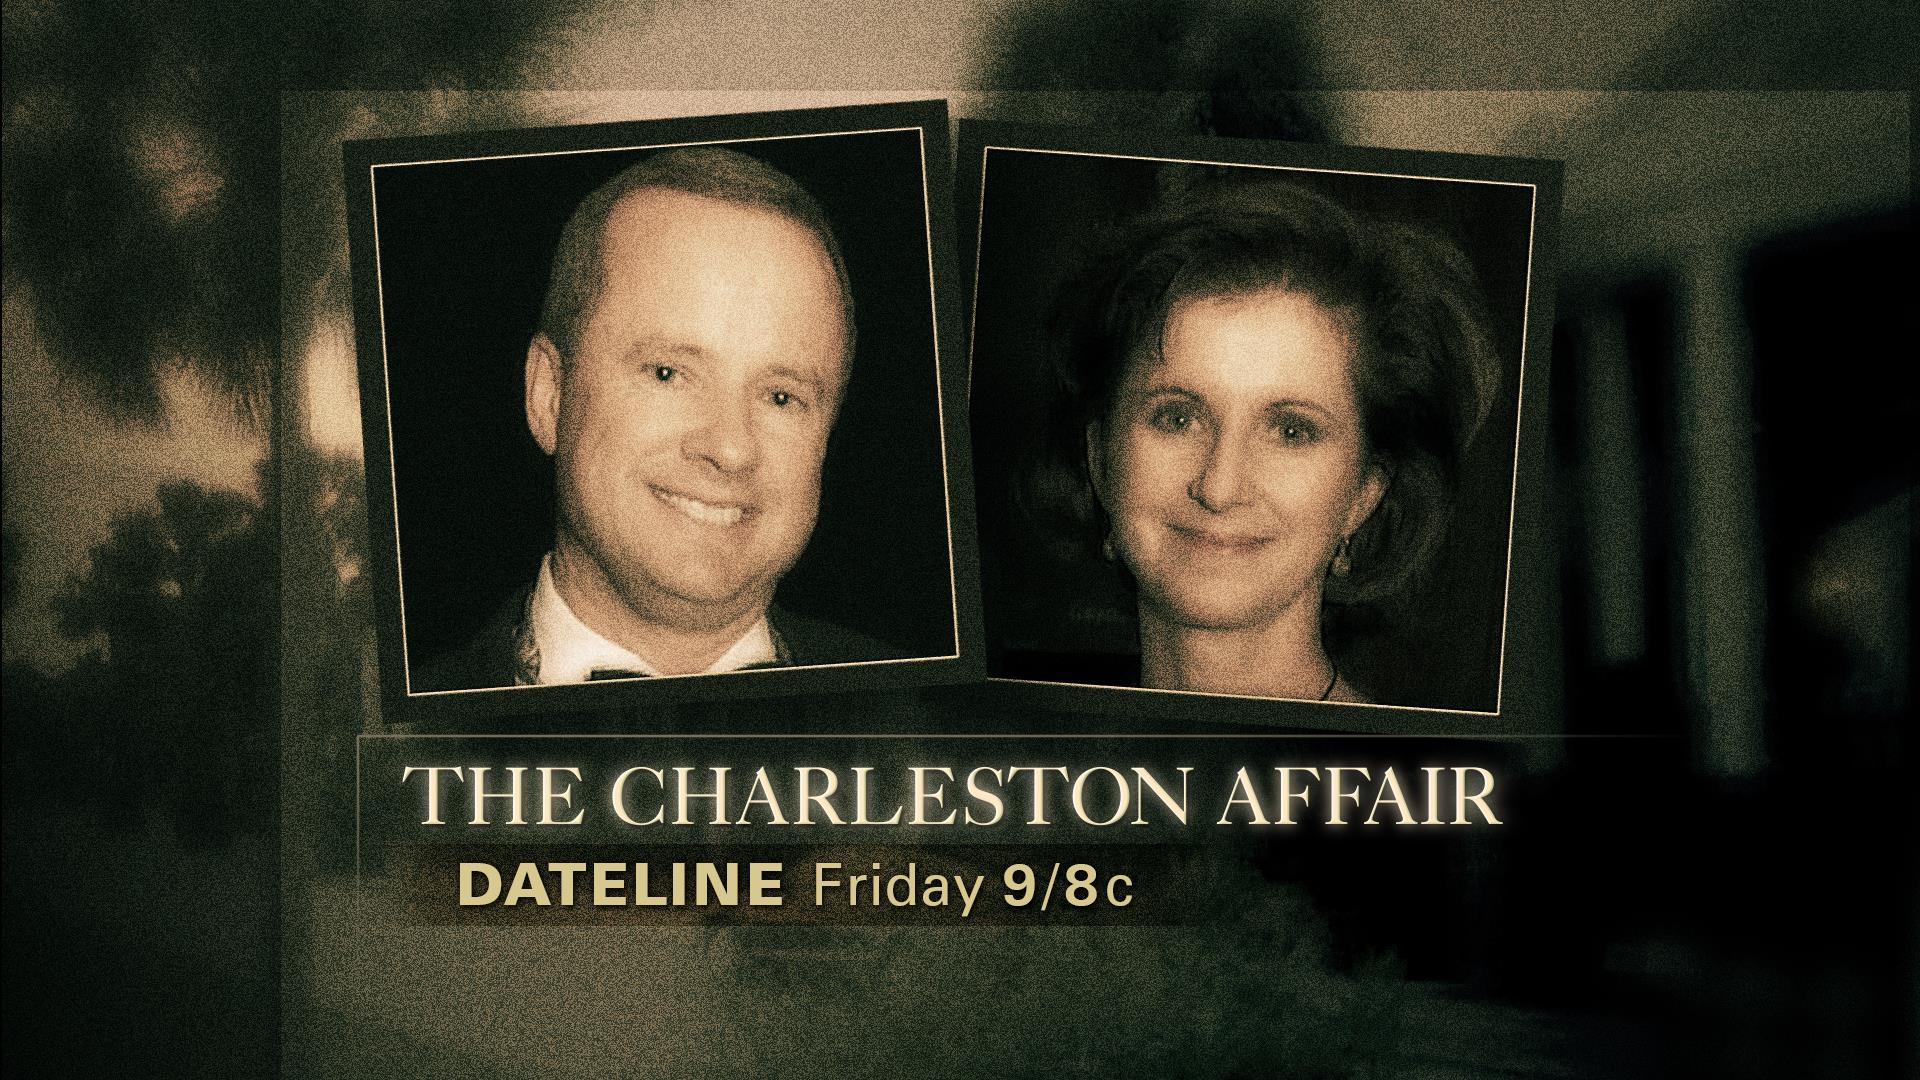 DATELINE FRIDAY PREVIEW: The Charleston Affair.